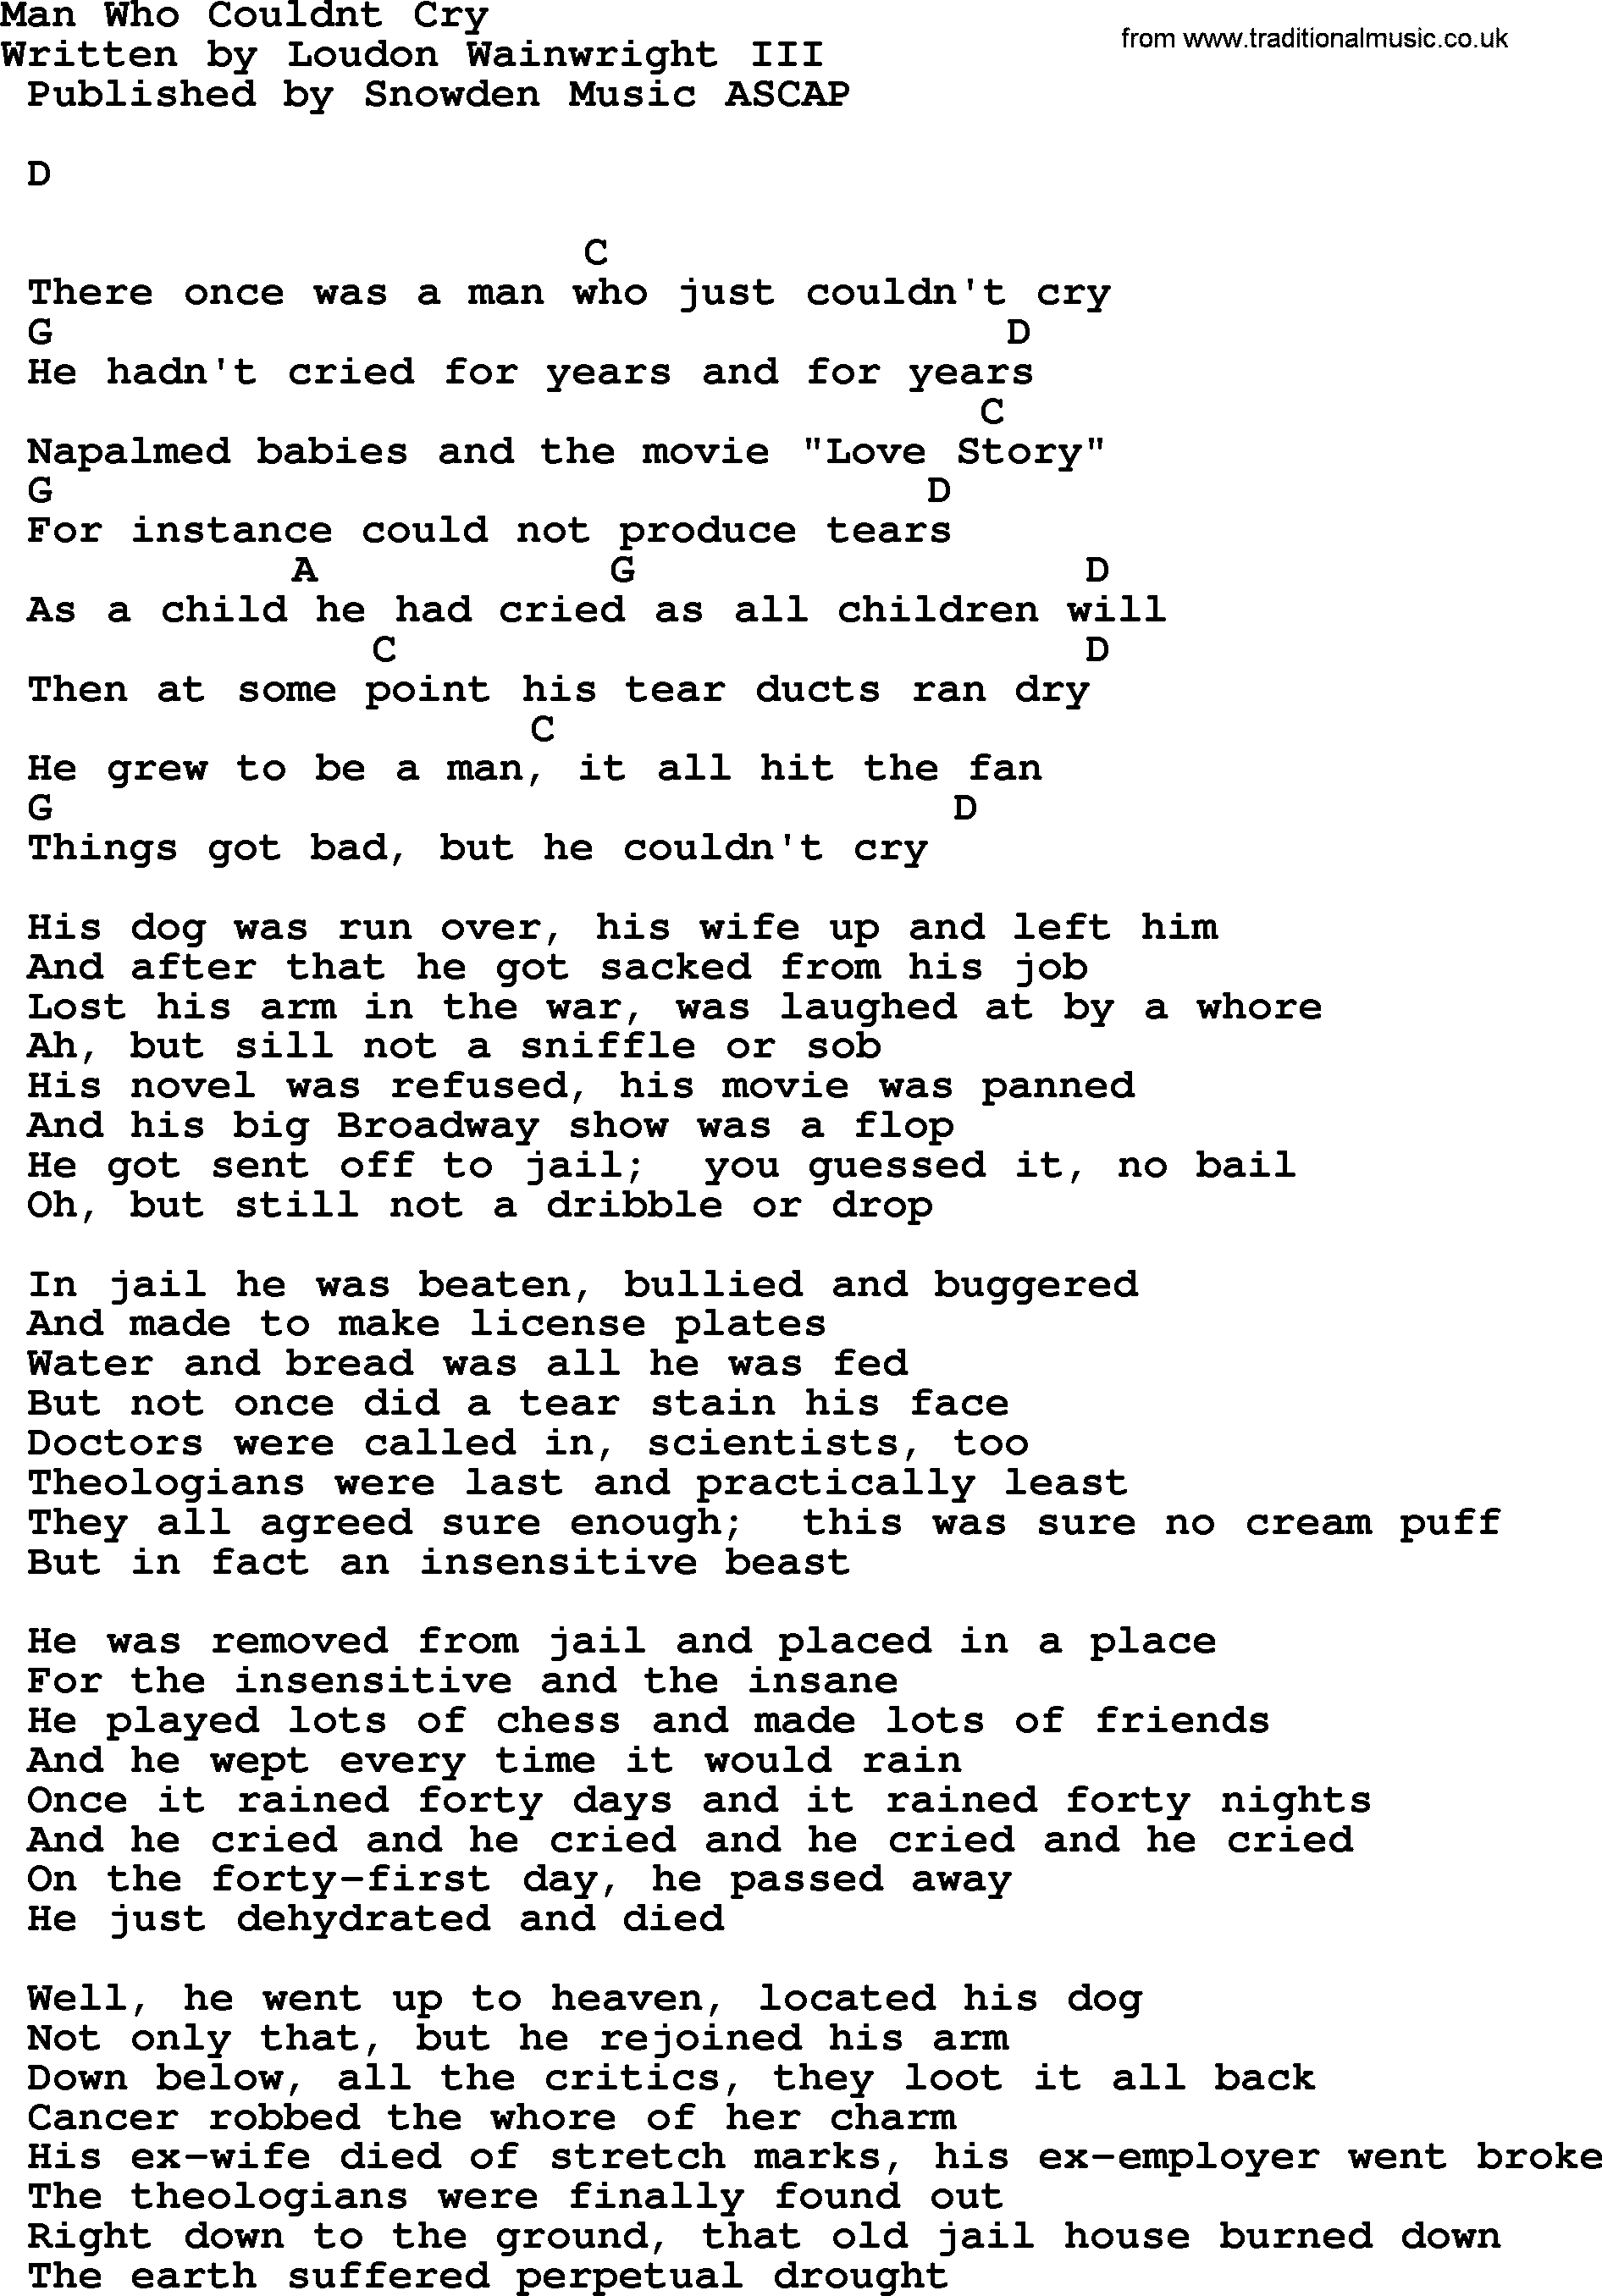 Johnny Cash song Man Who Couldnt Cry, lyrics and chords